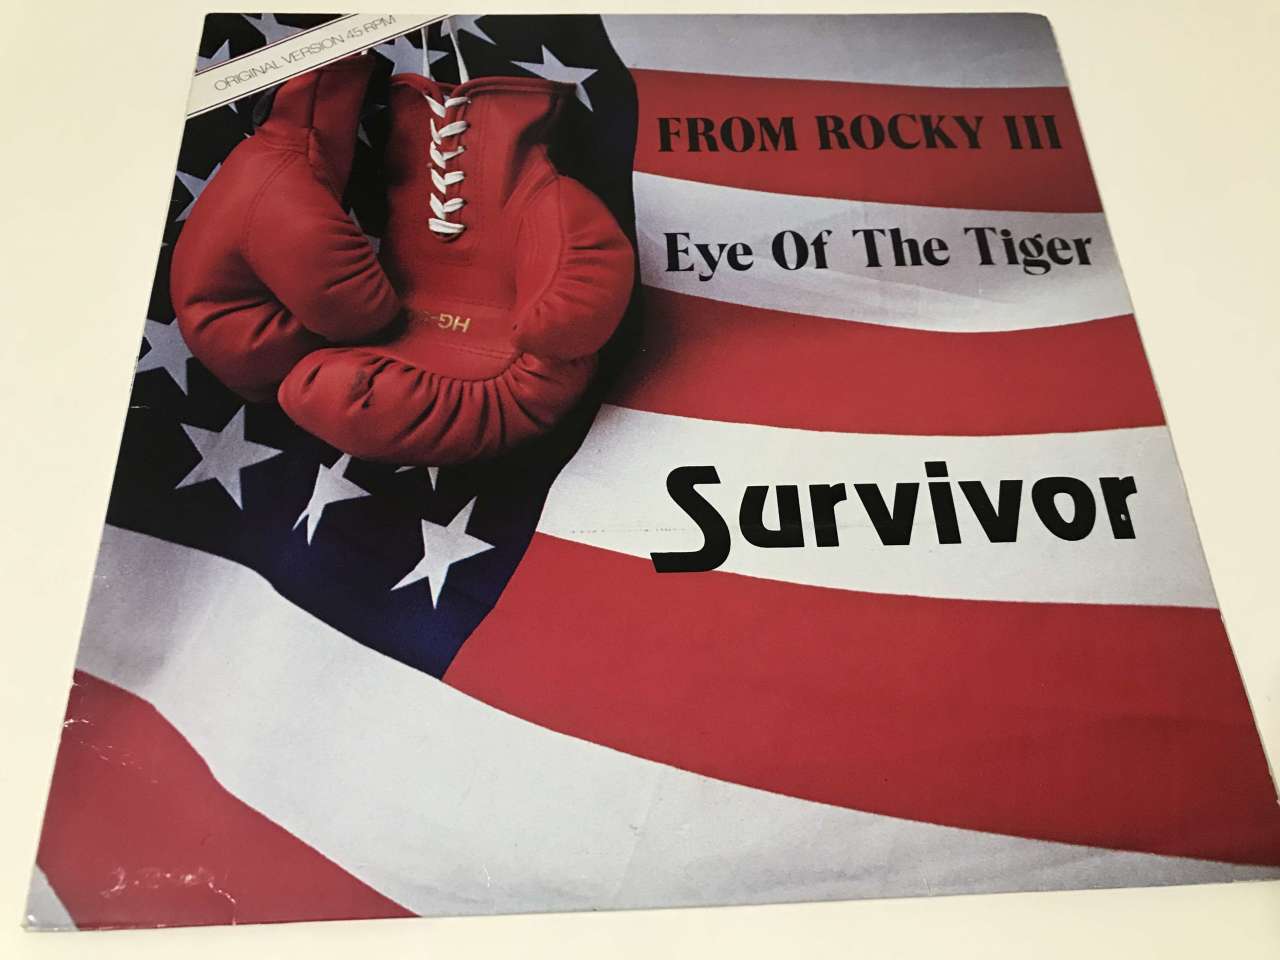 Survivor – Eye Of The Tiger (From Rocky III)